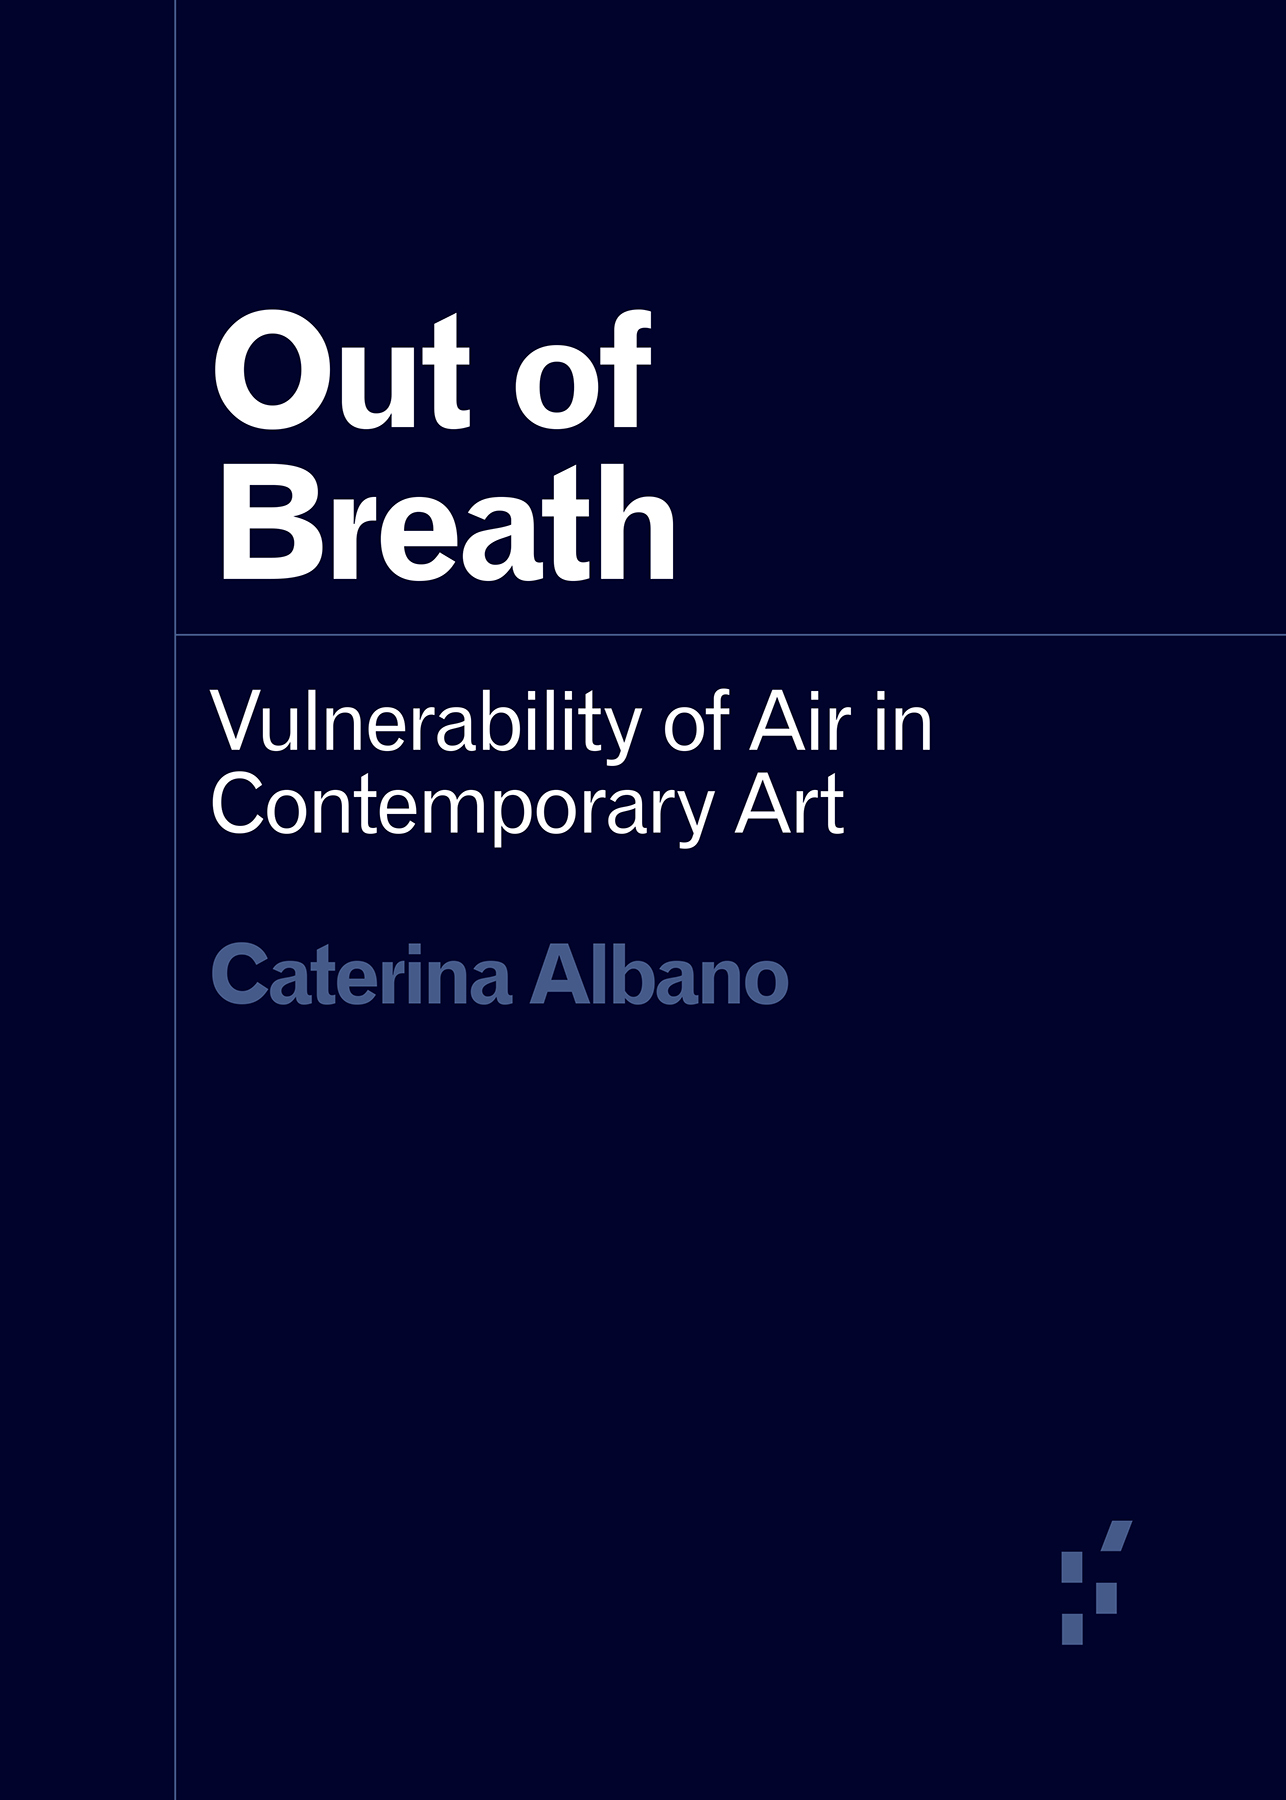 Cover Page for Out of Breath